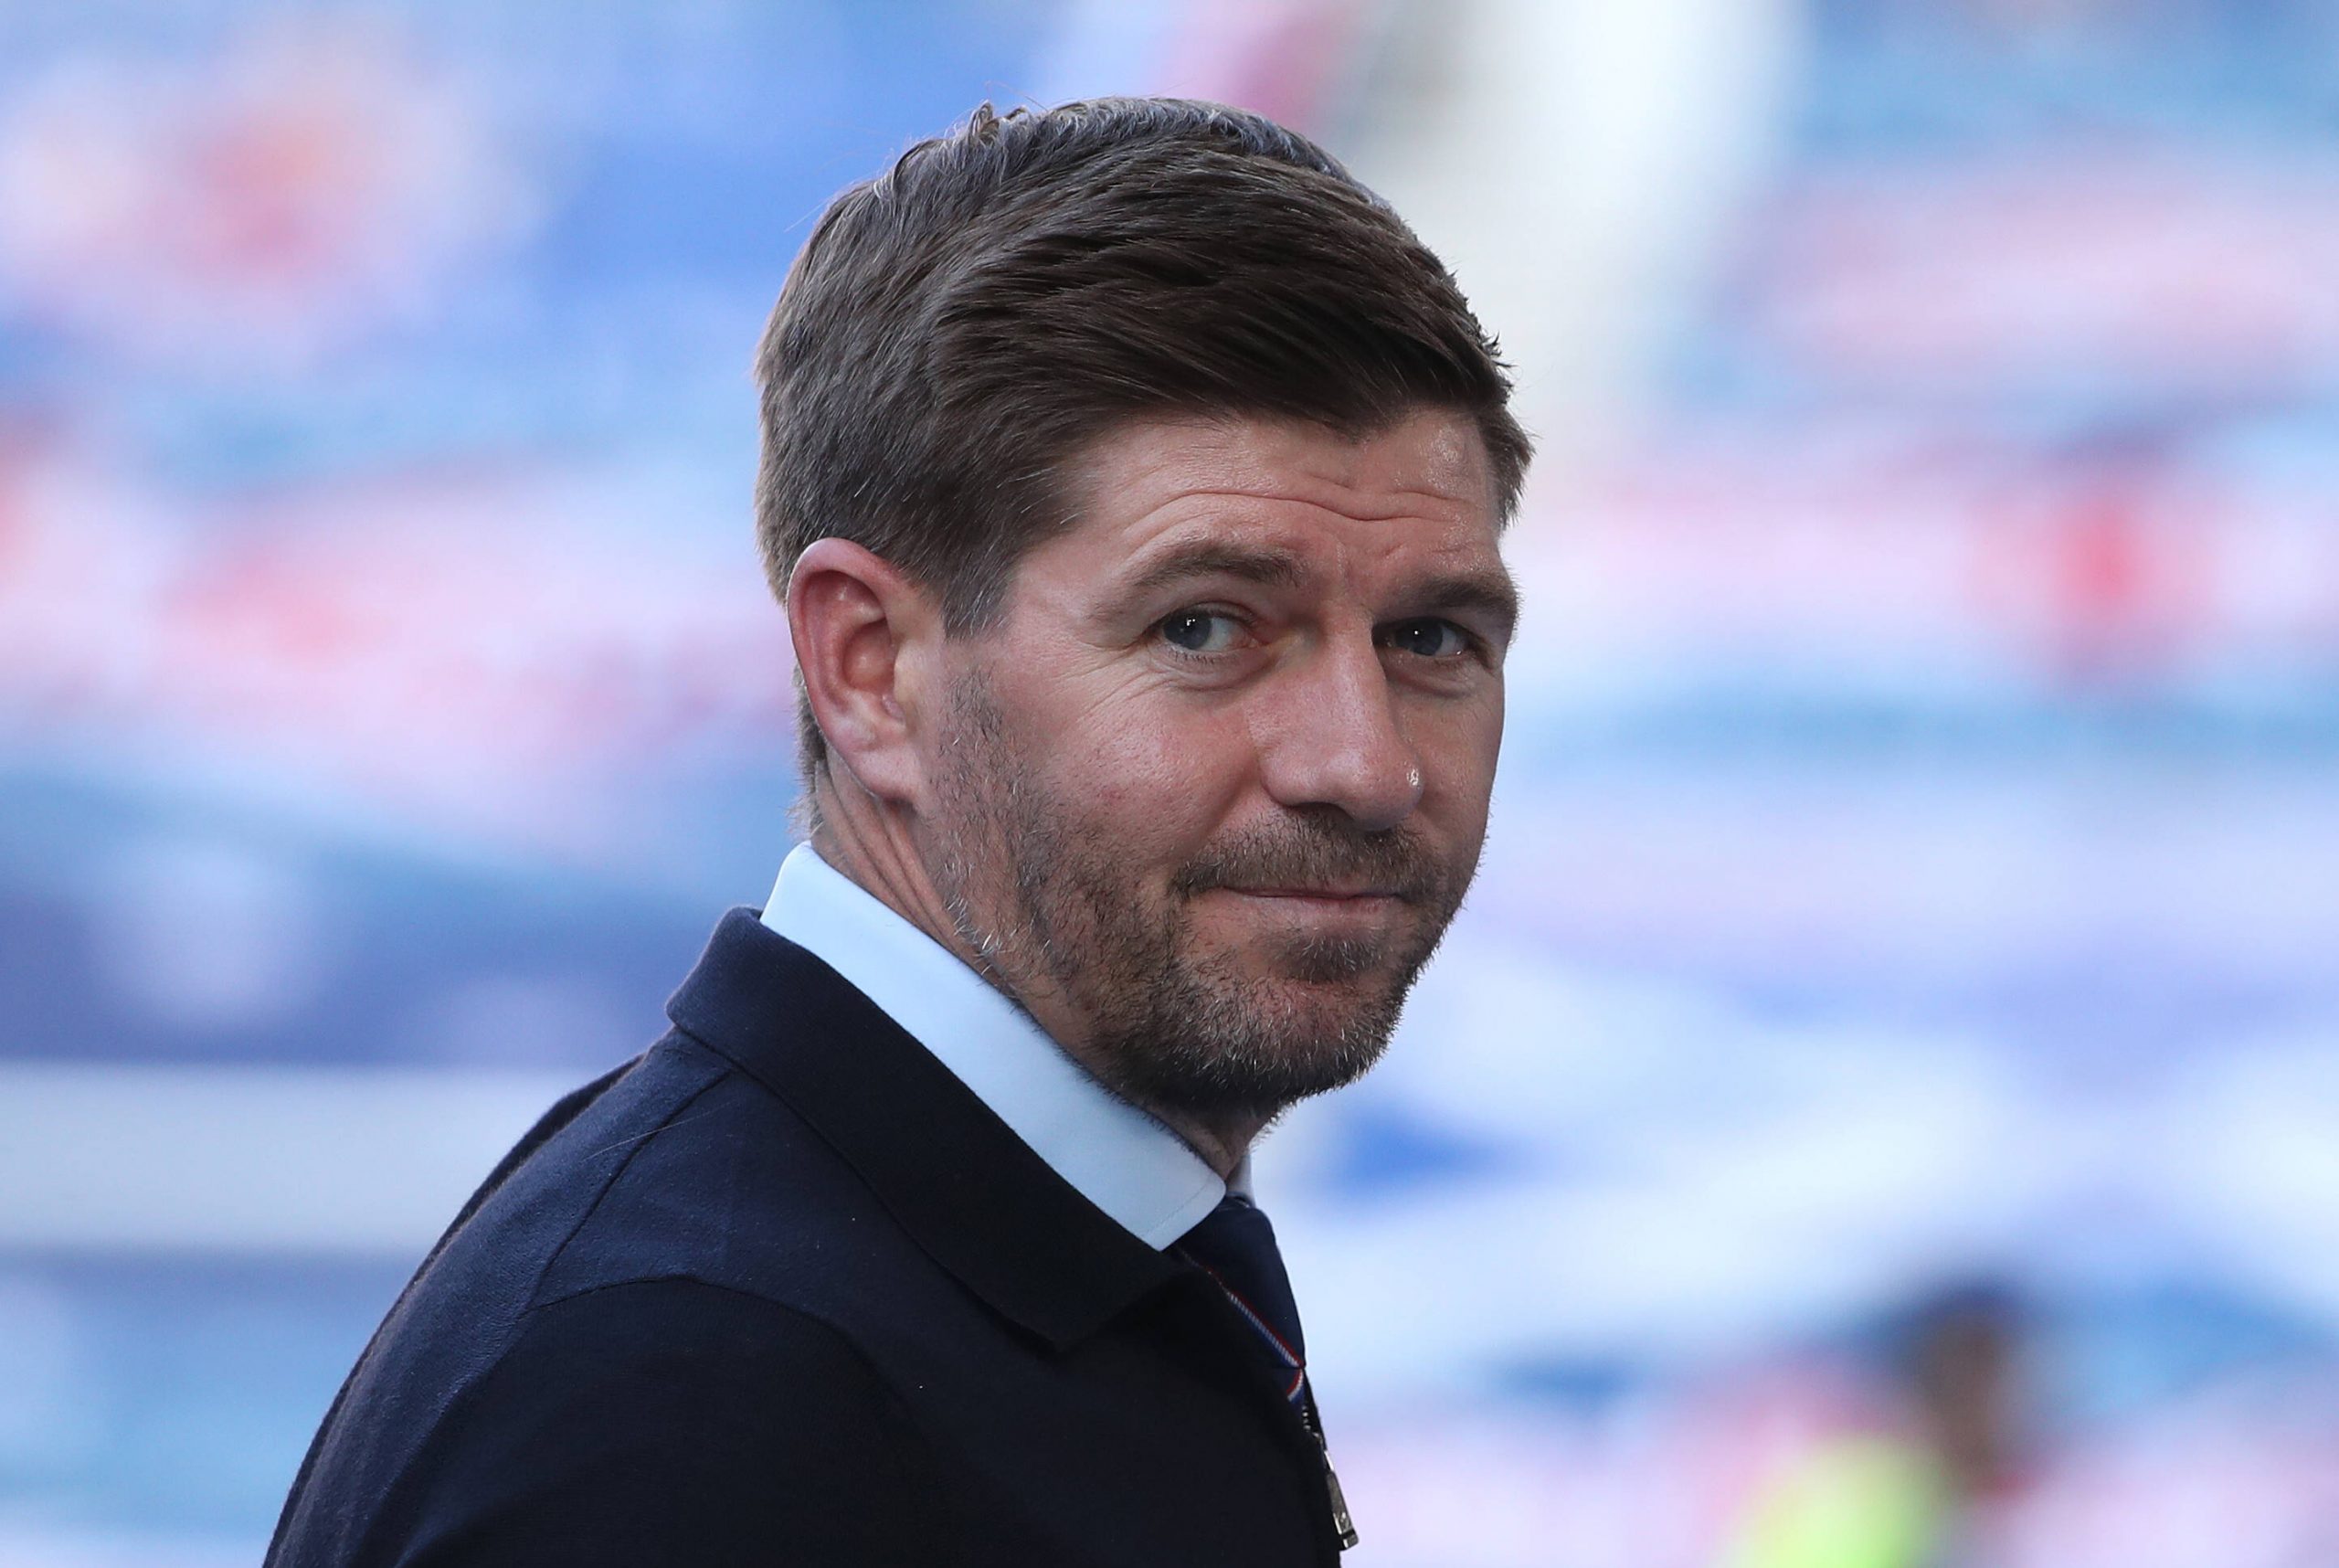 Steven Gerrard is reported to be looking at Oli McBurnie